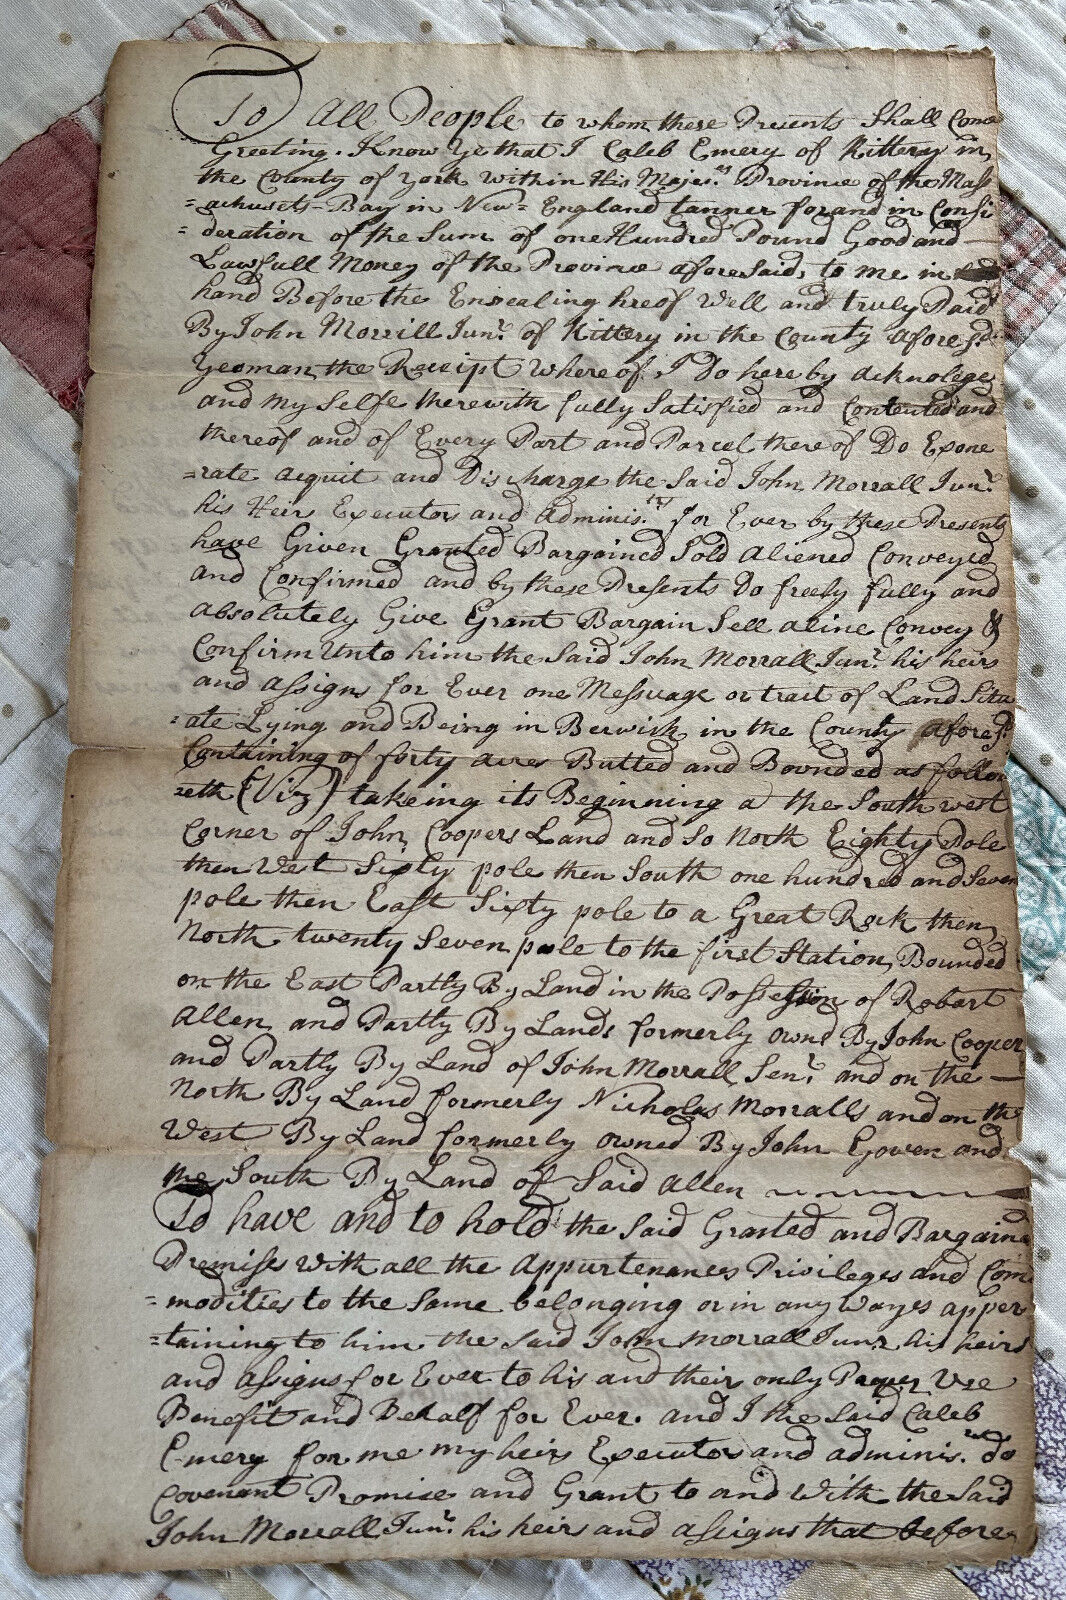 1735 COLONIAL DEED  KITTERY, MAINE * EMERY TO MERRILL * FRENCH & INDIAN WAR VET